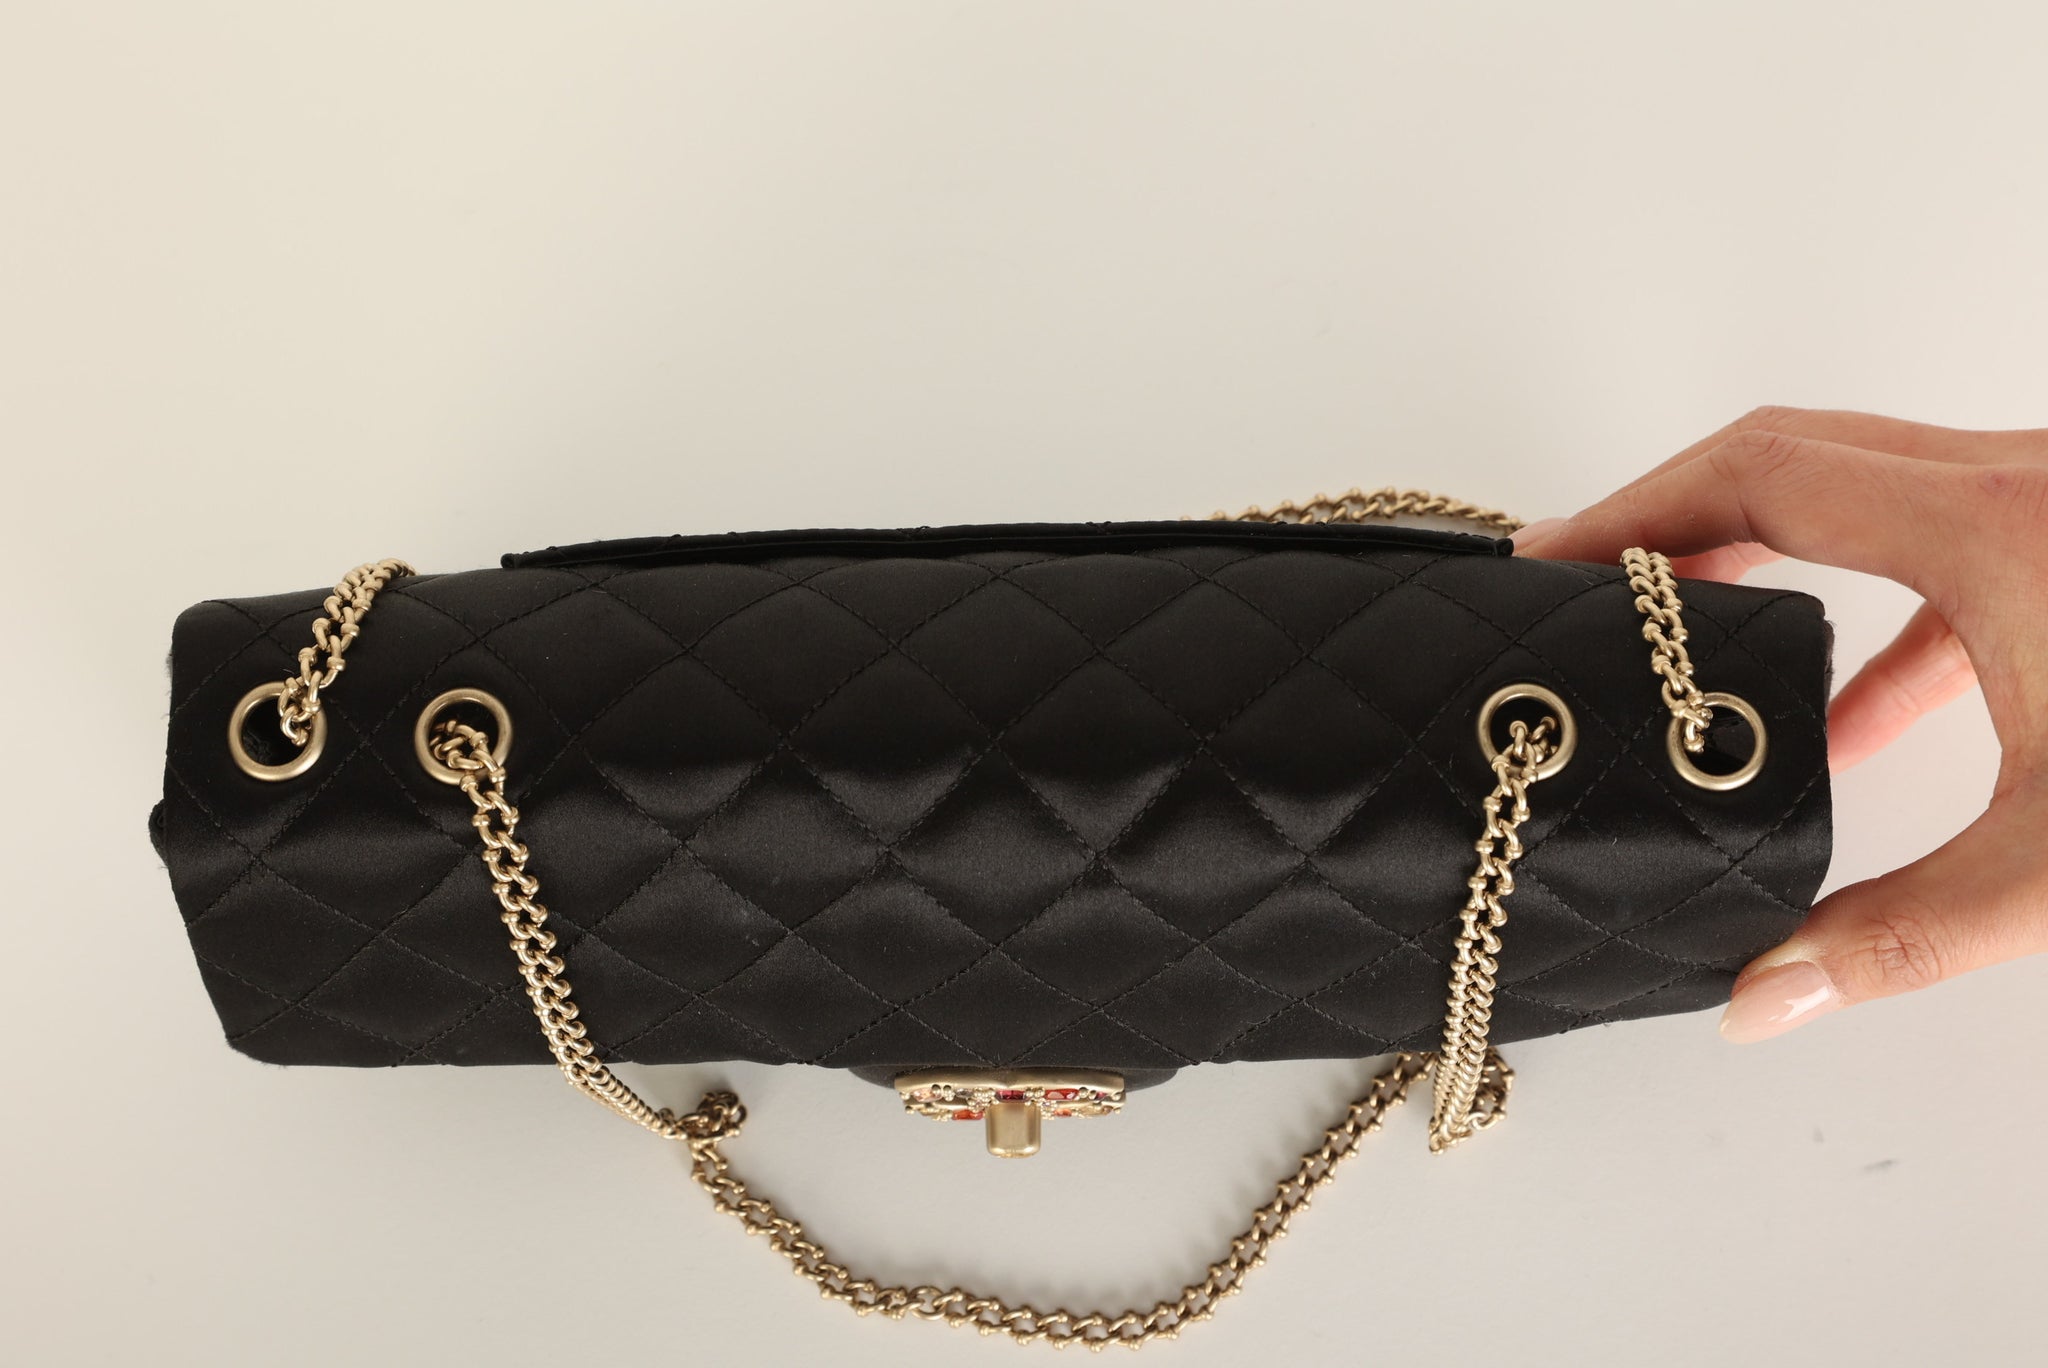 Extremely Rare Chanel 2008 Satin Gemstone East West